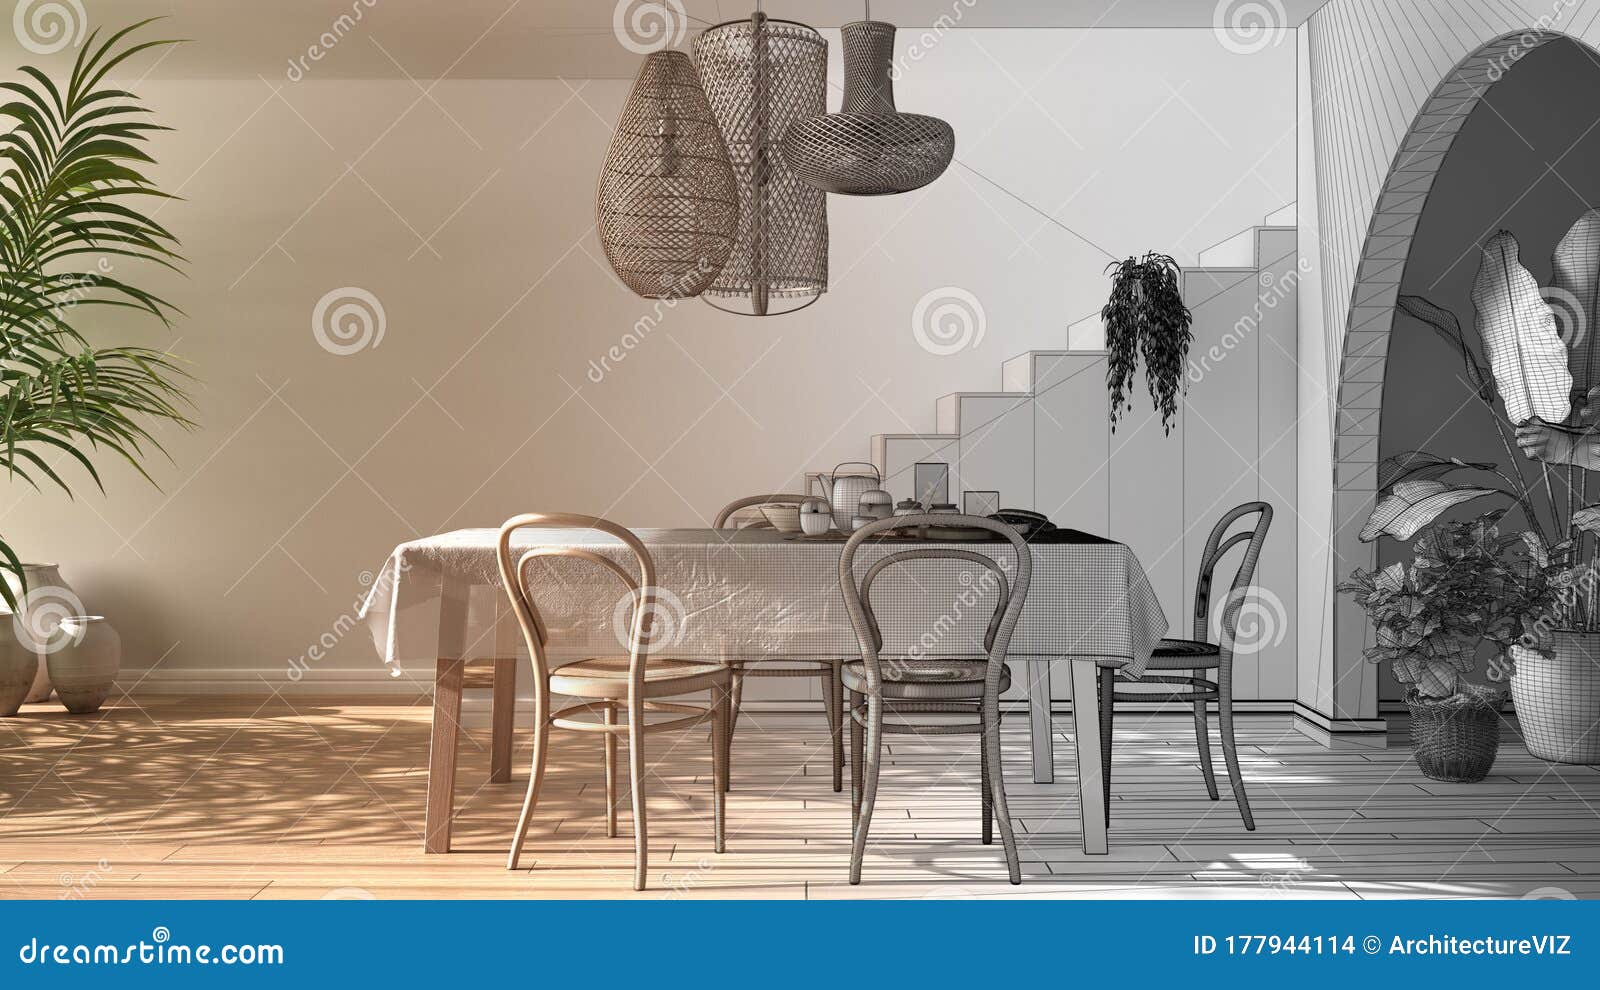 Modest retro kitchen table chairs Architect Interior Designer Concept Unfinished Project That Becomes Real Retro Dining Room With Table And Chairs Breakfast Stock Illustration Of Inspiration 177944114